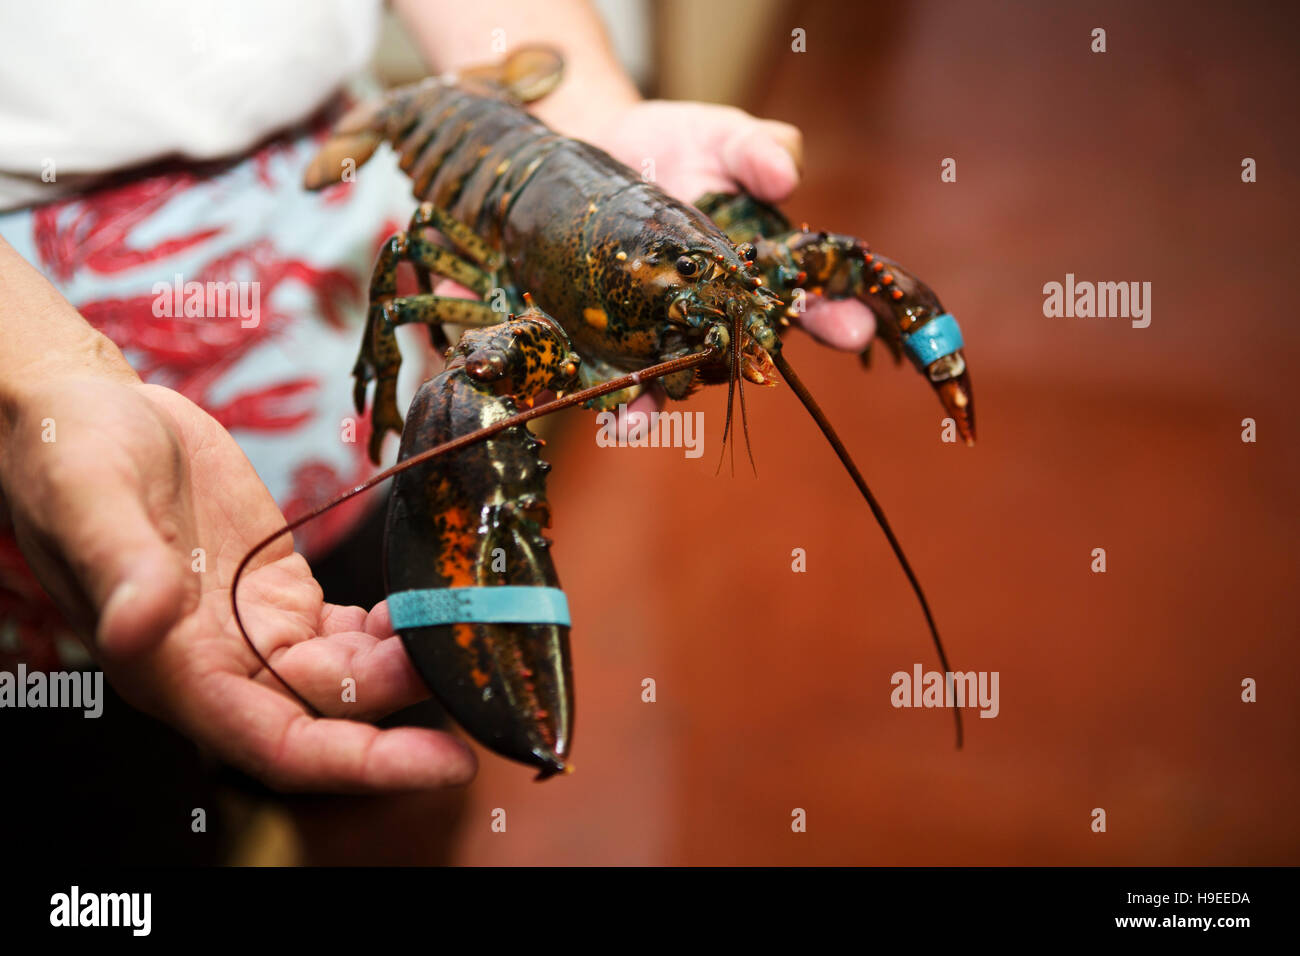 A man holds a lobster at Halls Harbour Lobster Pound in Nova Scotia, Canada. Hall's Harbour has a long history of lobster fishing. Stock Photo